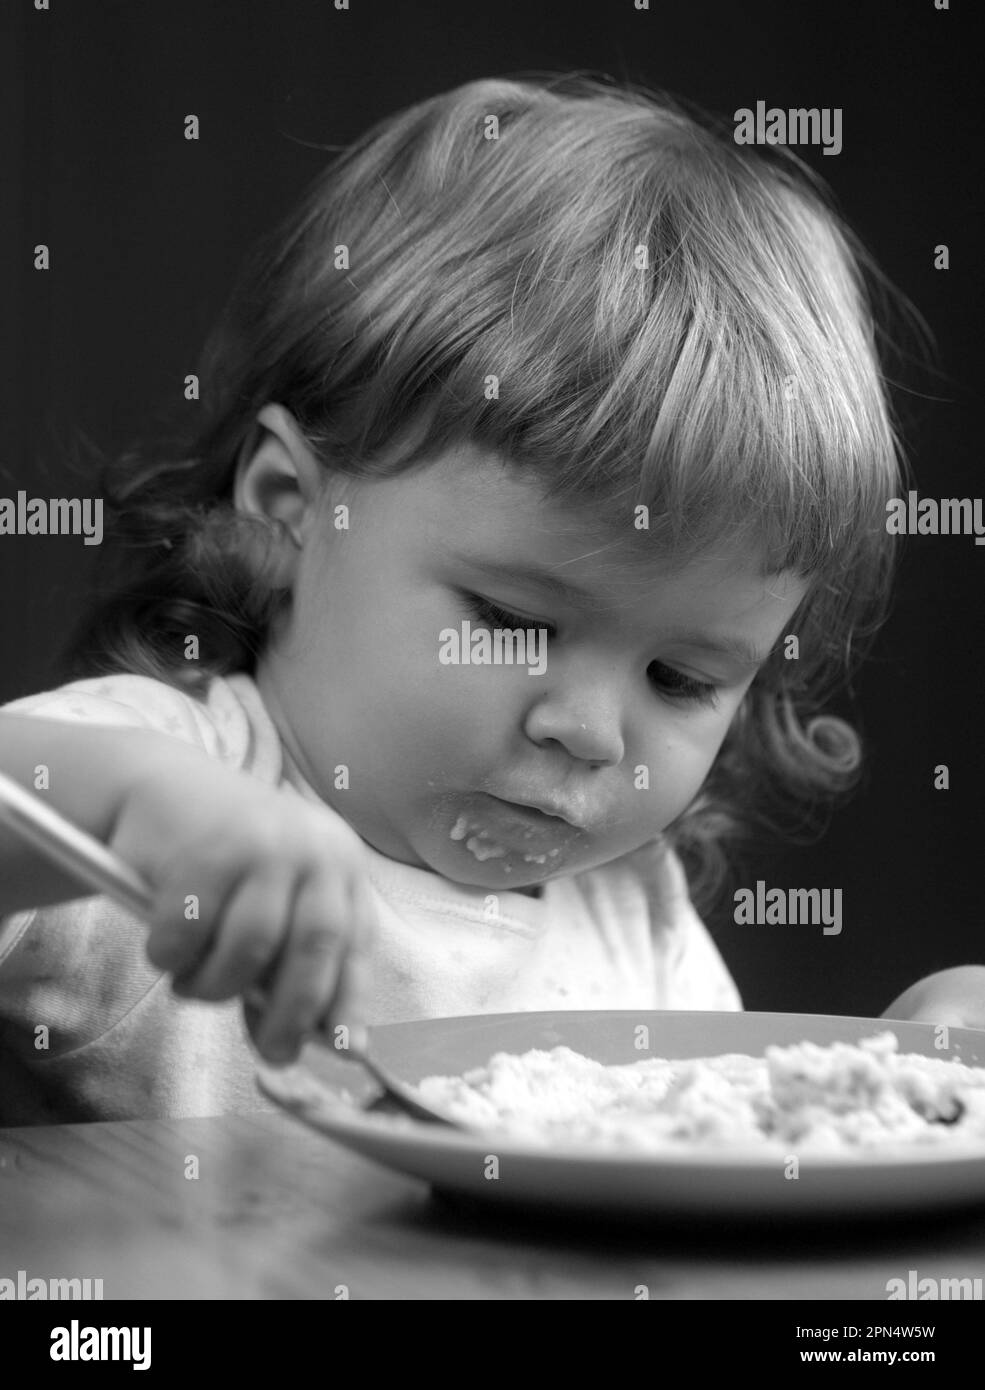 Child eating, nutrition concept. Cute baby face with a spoon and a ...